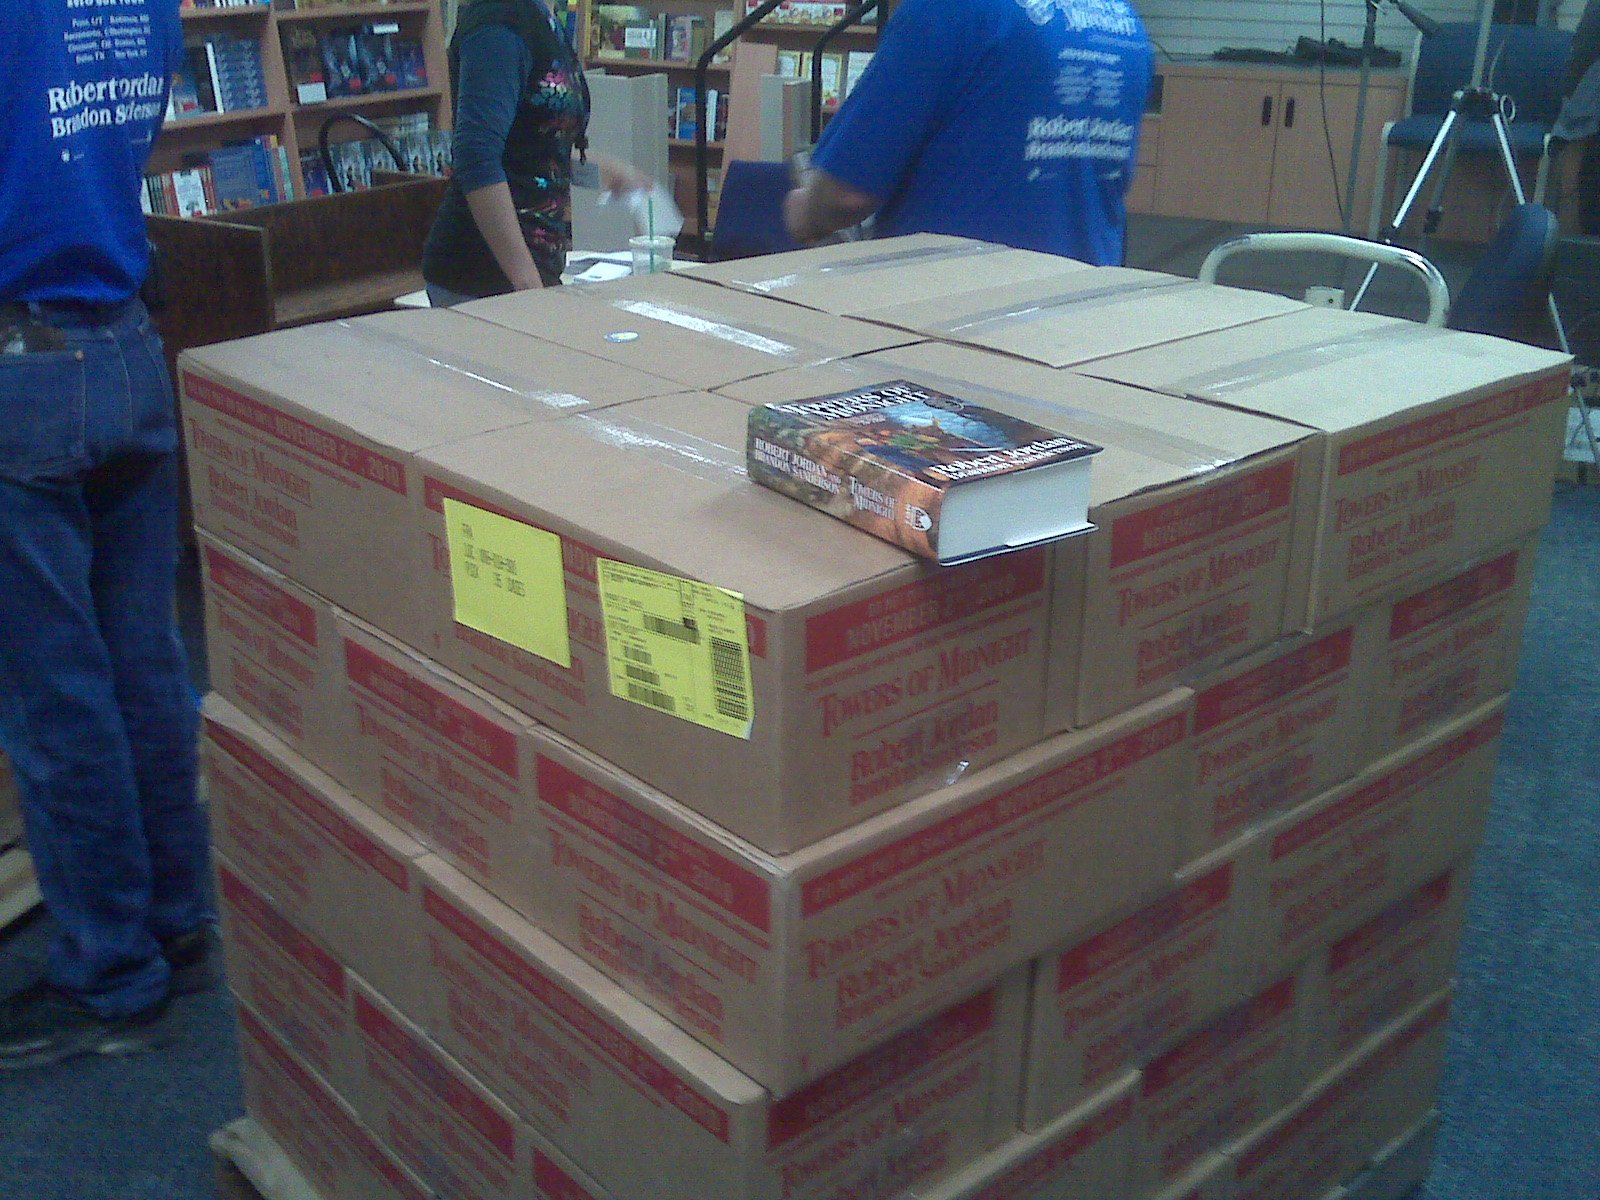 The Books Have Arrived!